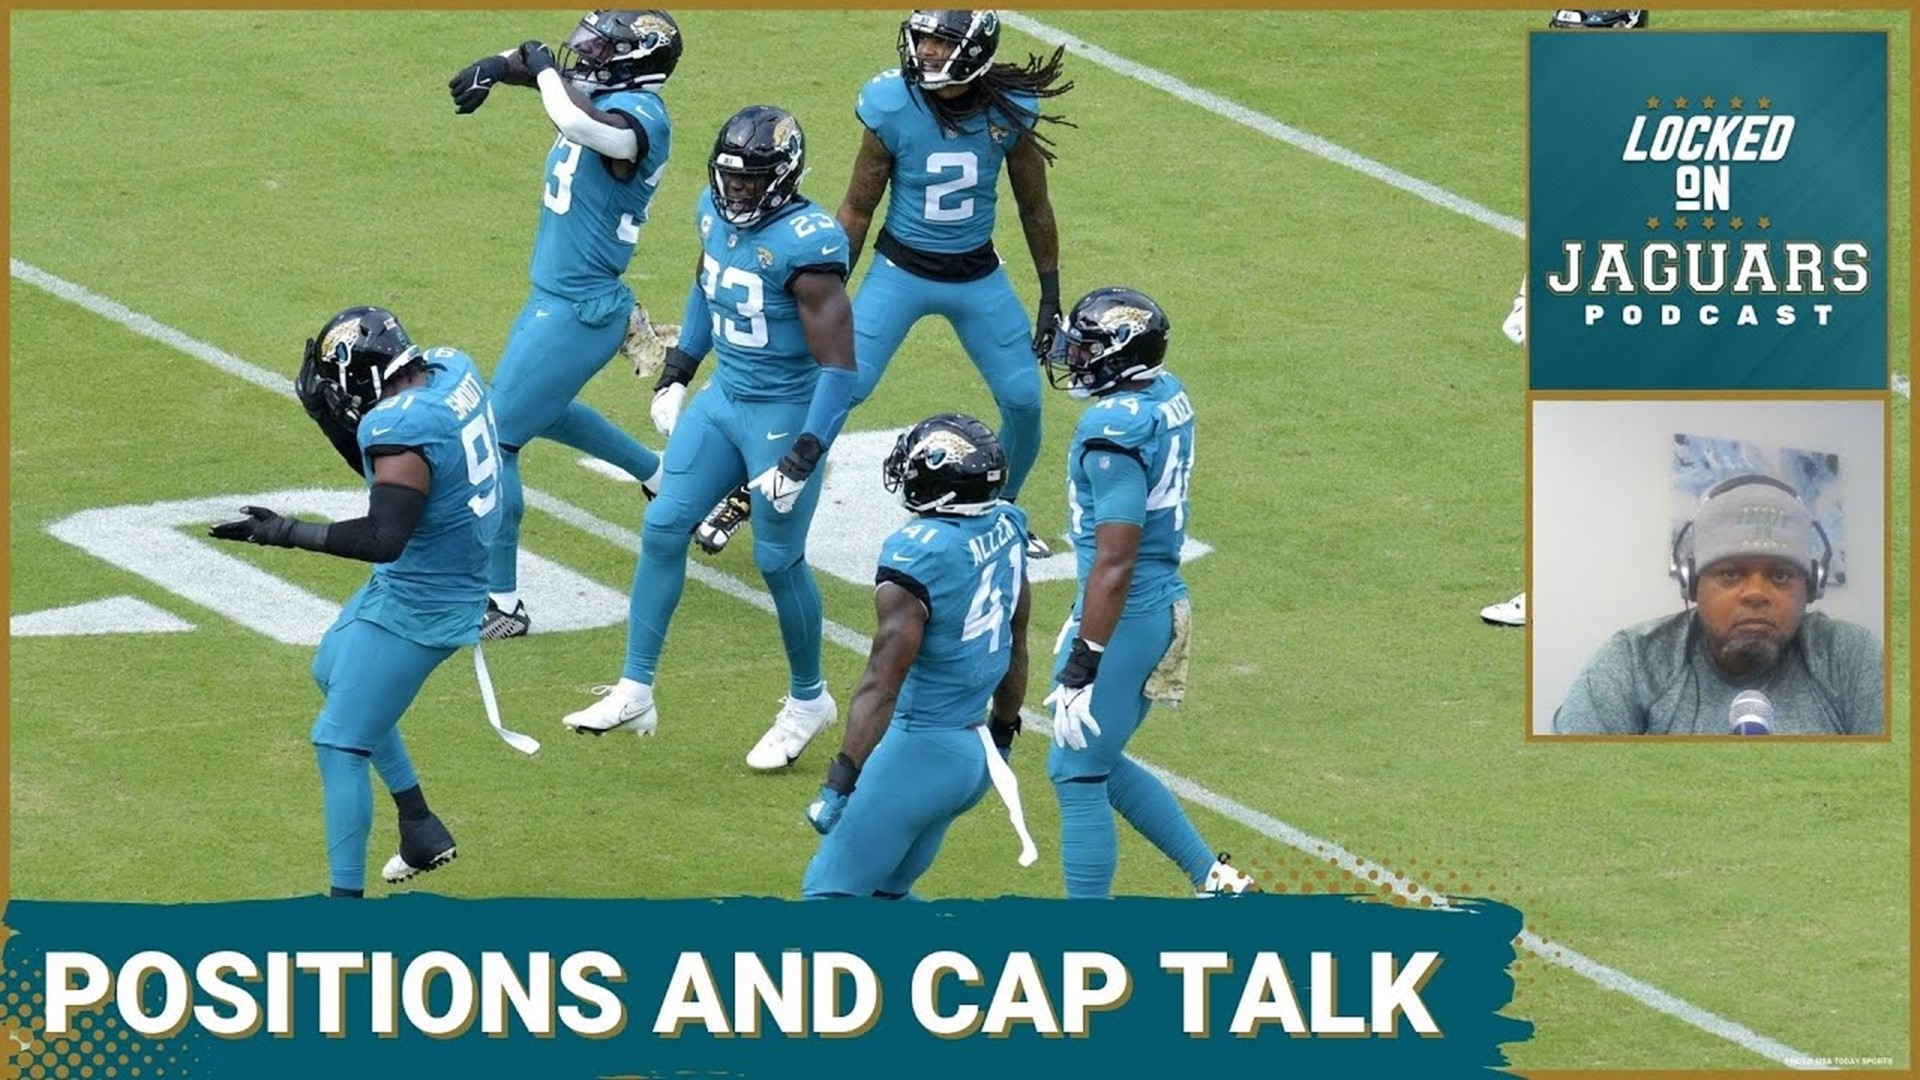 Expert opinions help me shape and form mine for the Locked On Jaguars Podcast.